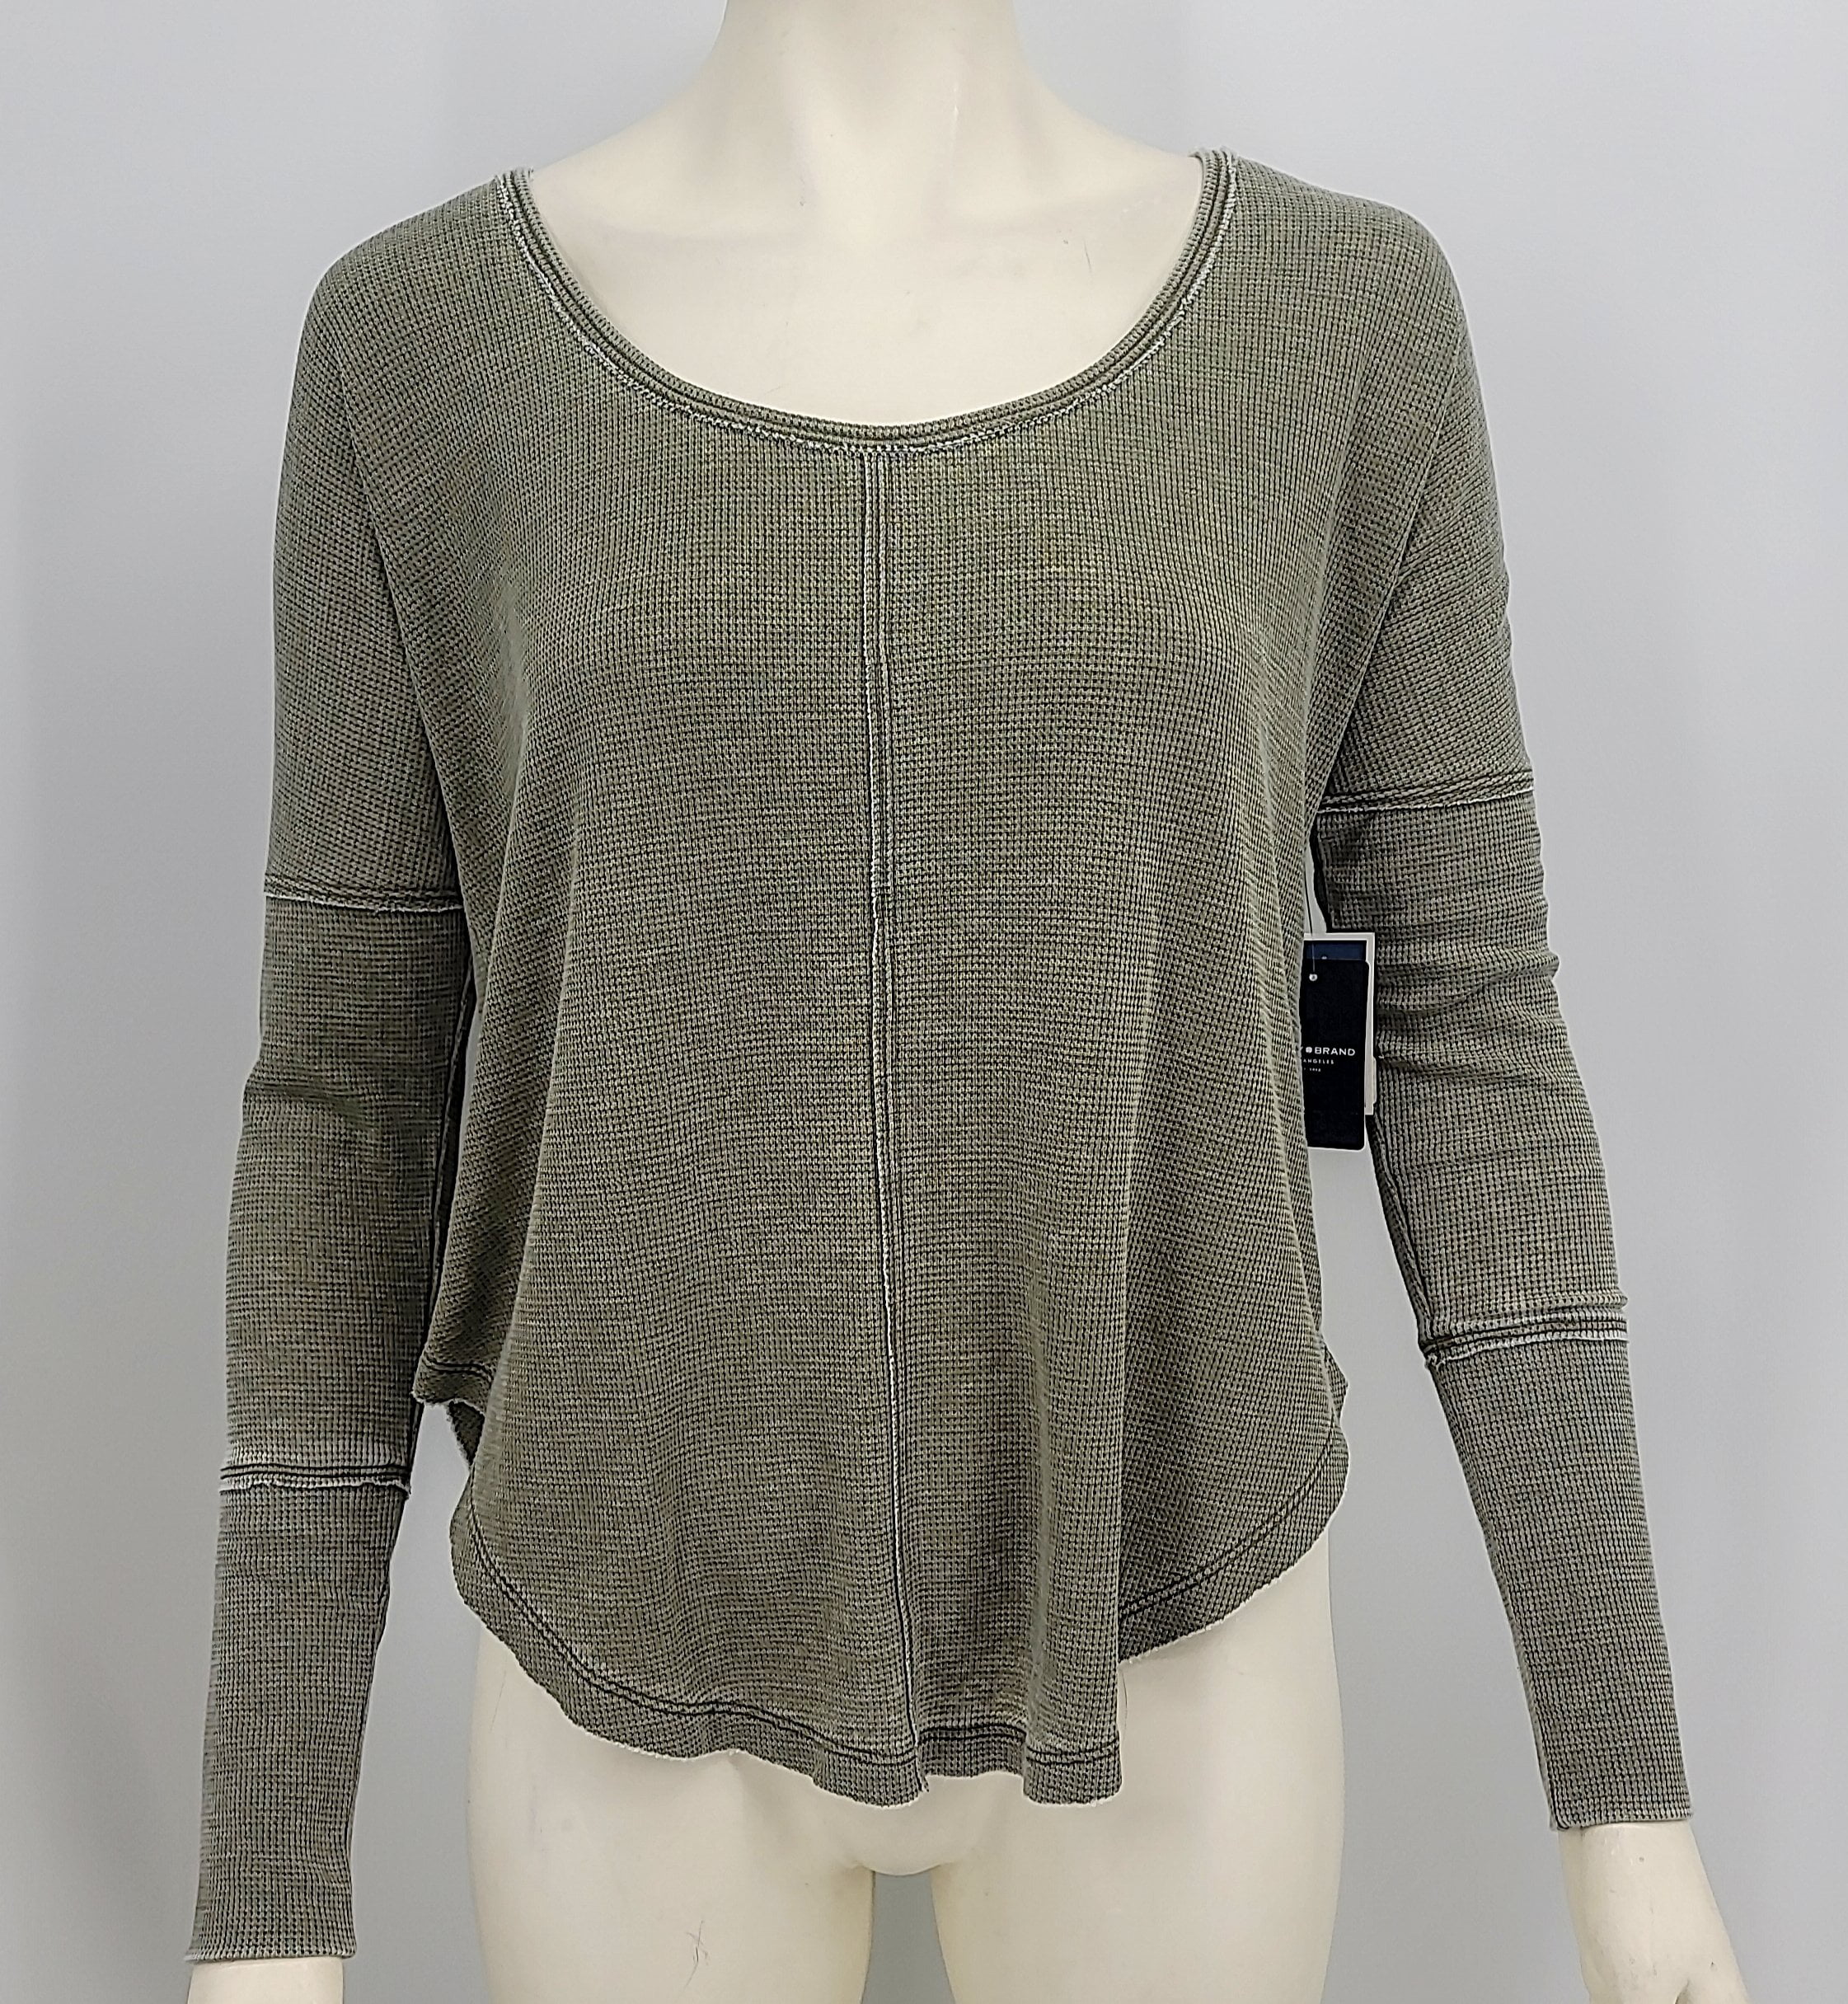 Details about   Lucky Brand Women's Long Sleeve Scoop Neck Pointel Choose SZ/color 